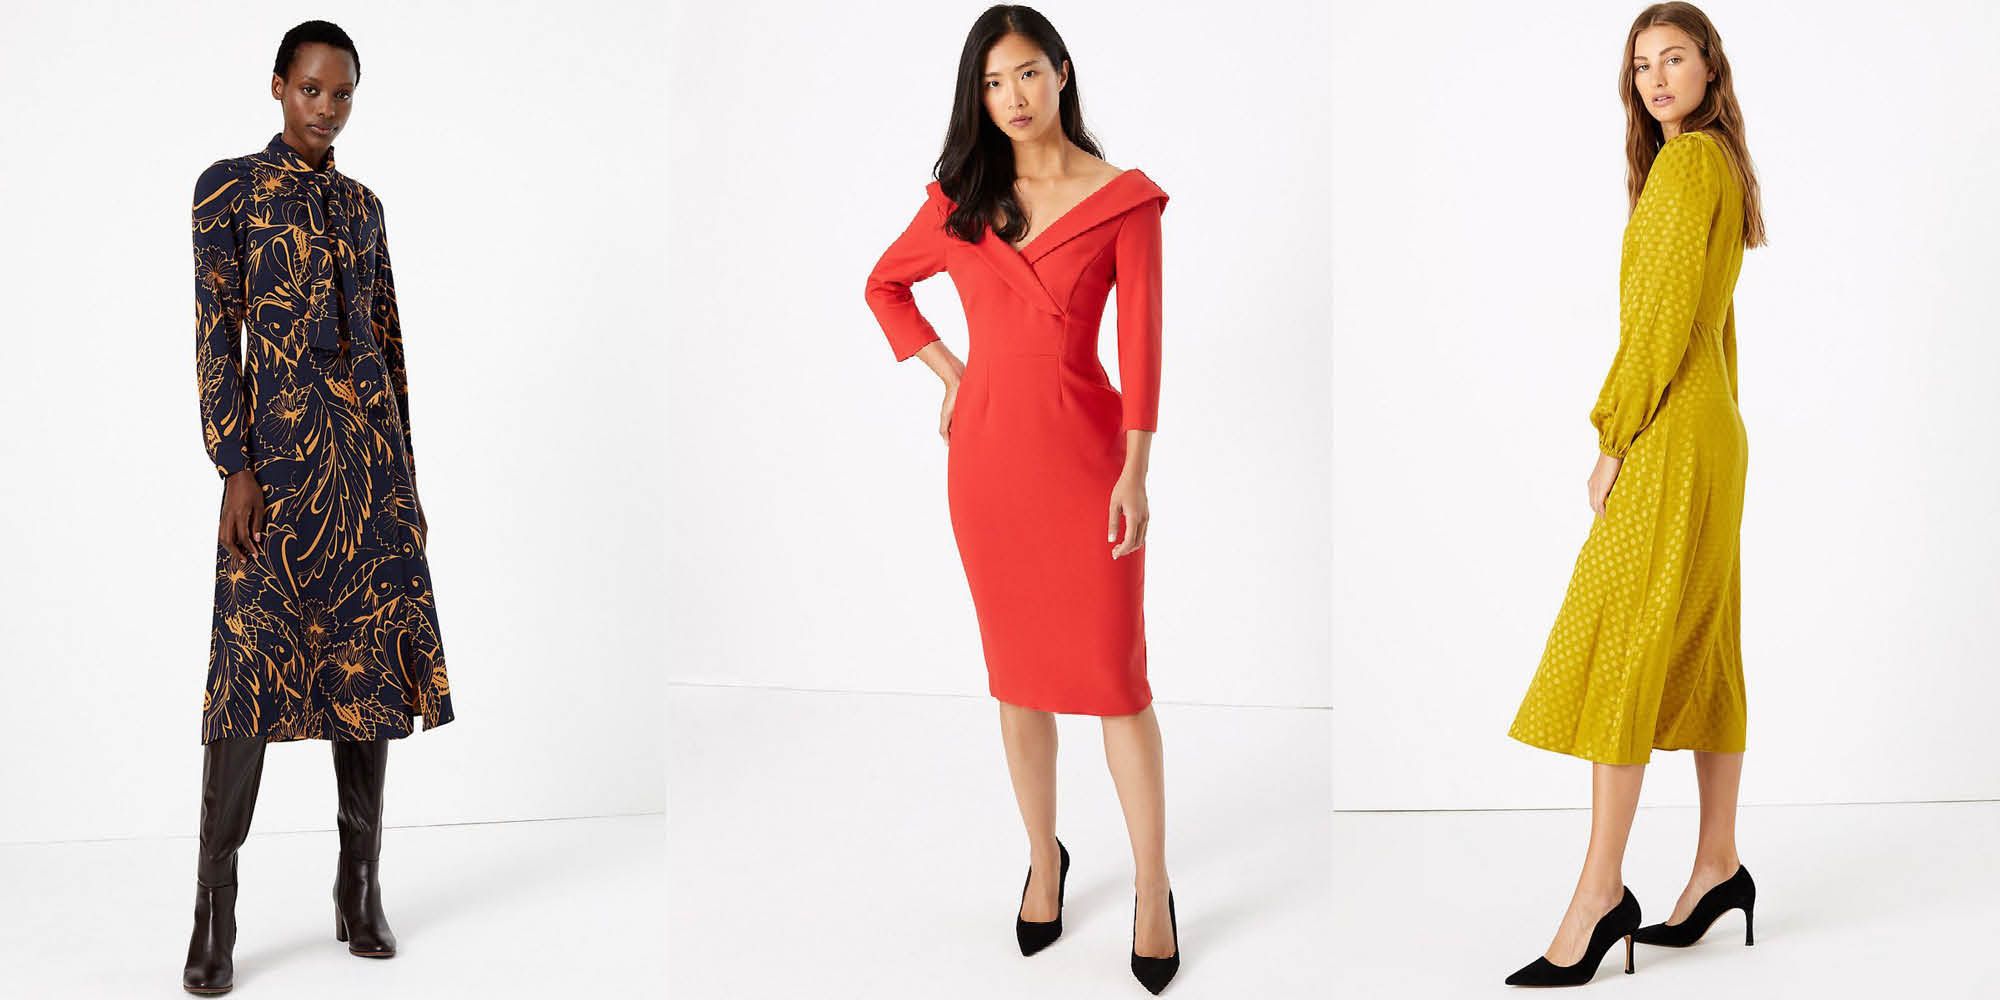 marks and spencer jersey dress